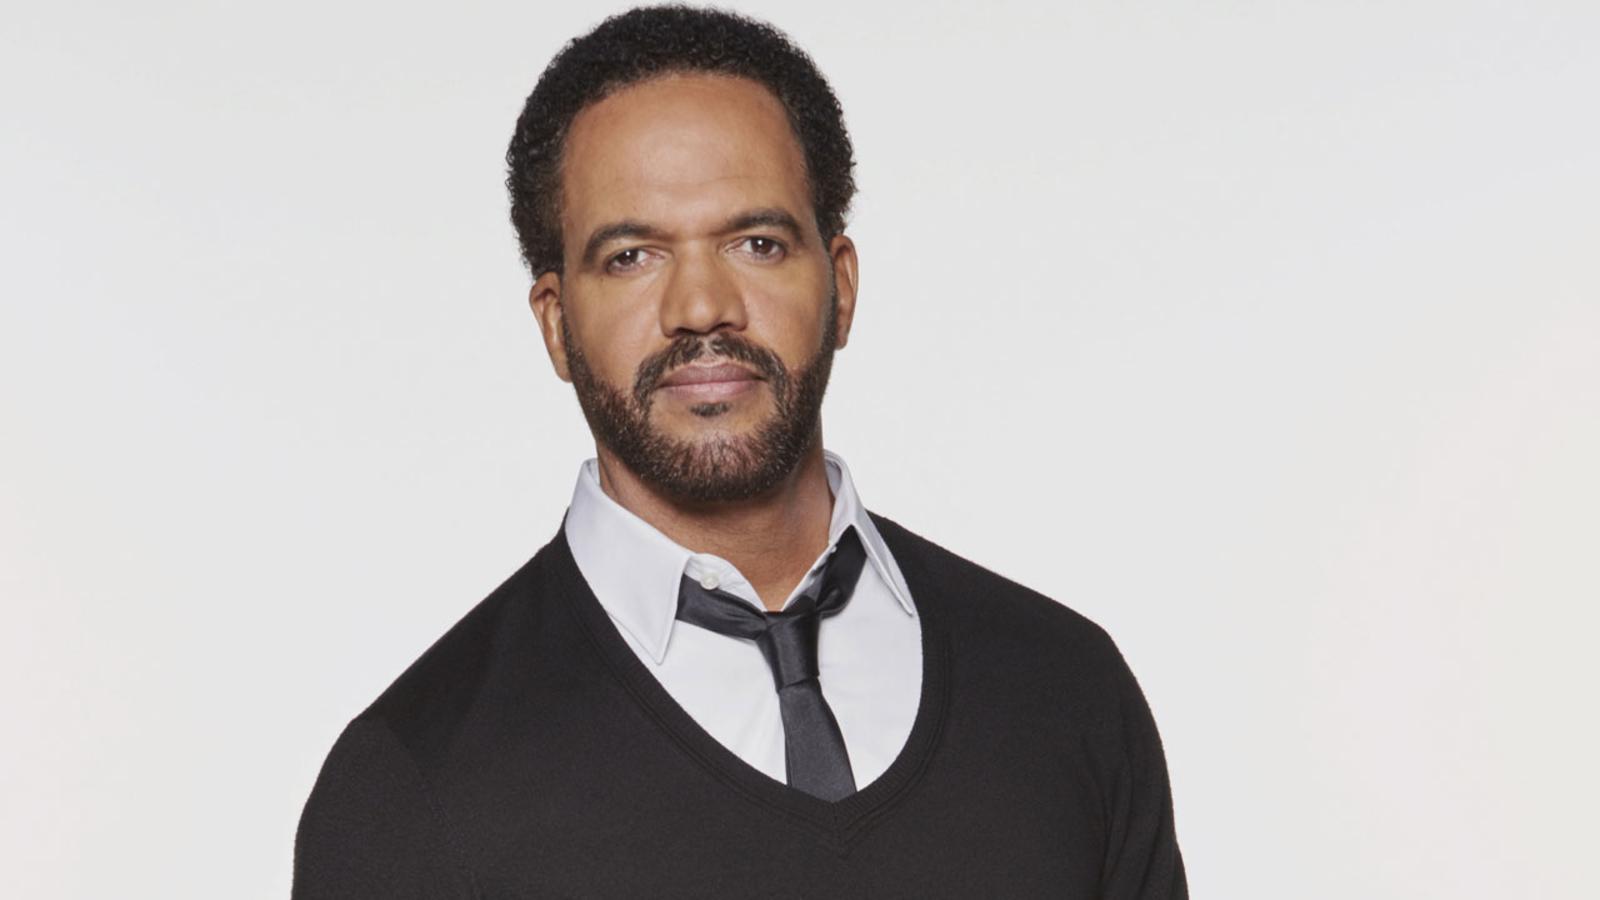 Kristoff St. John, 'Young and the Restless' actor, dead at 52abc.com